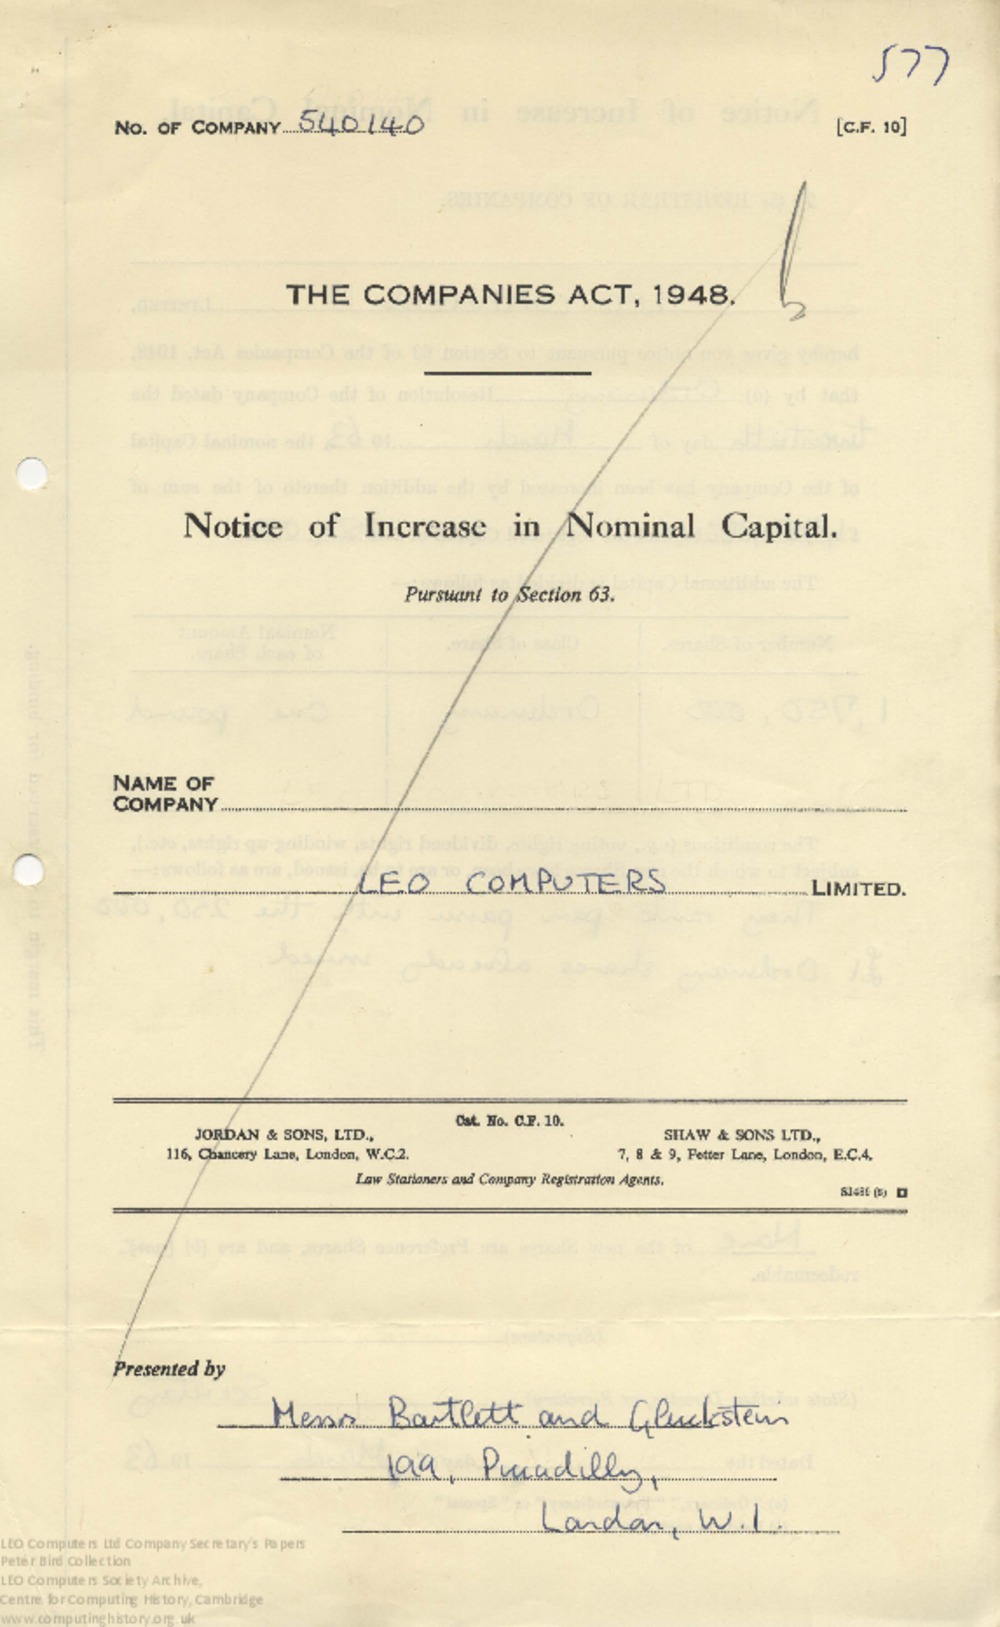 Article: 64209 Legal Companies Act forms for LEO Computers Ltd, March 1963